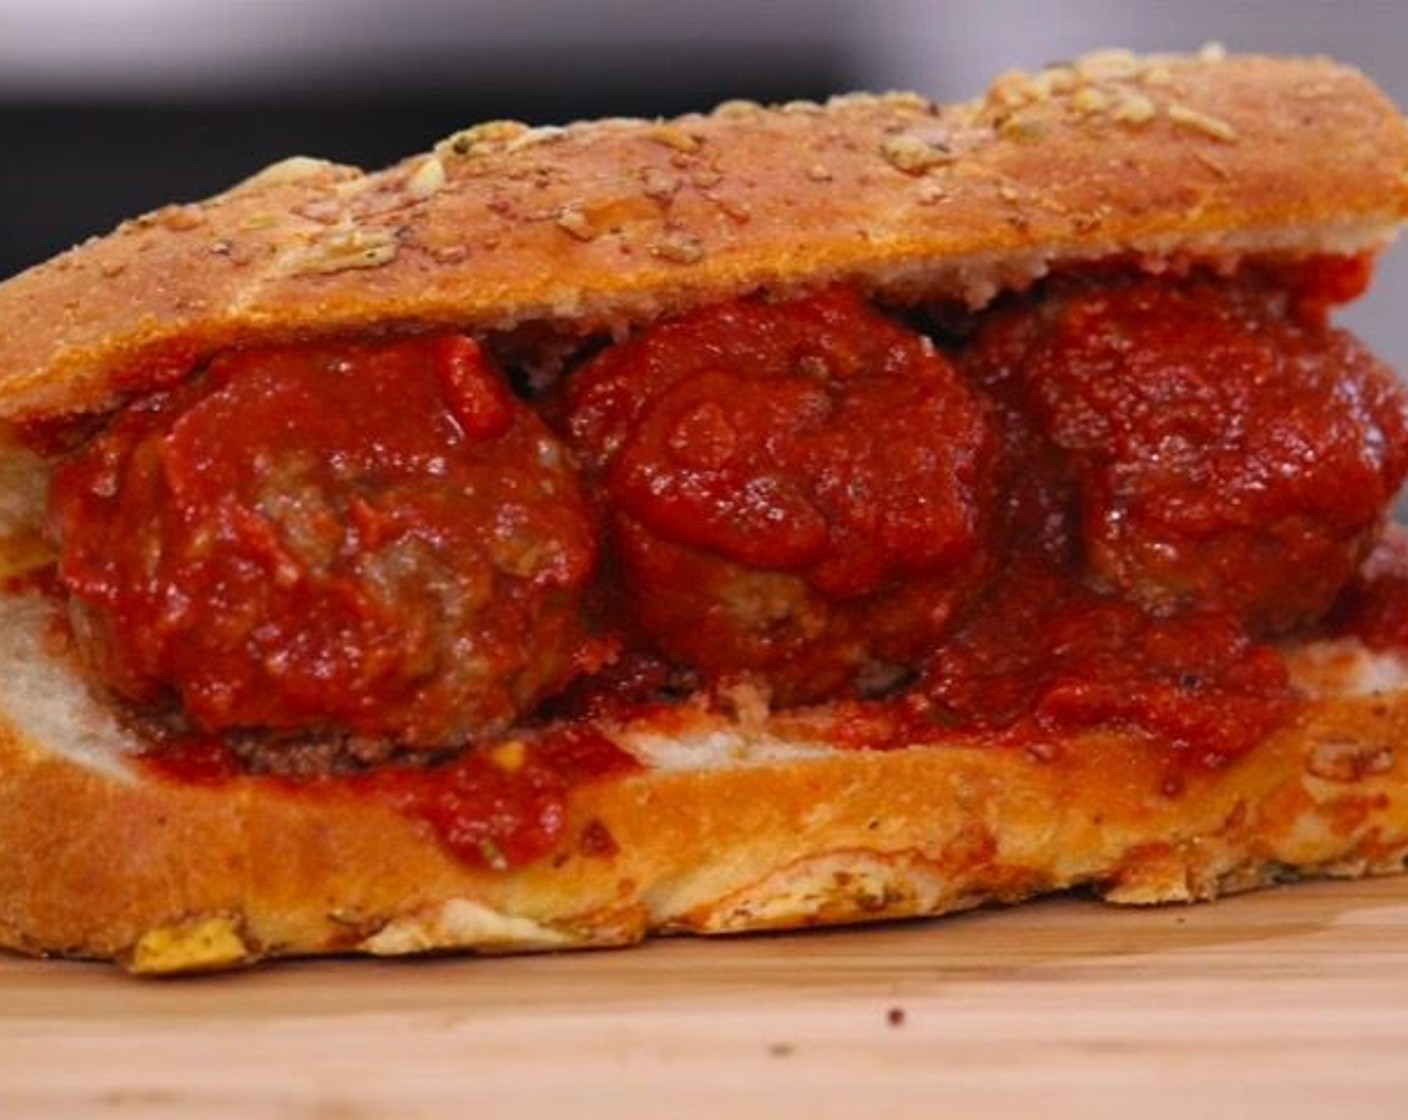 step 17 To assemble, cut the bread in half and place warm 3-4 meatballs on each 6-inch sub. Top with extra sauce. Serve immediately!